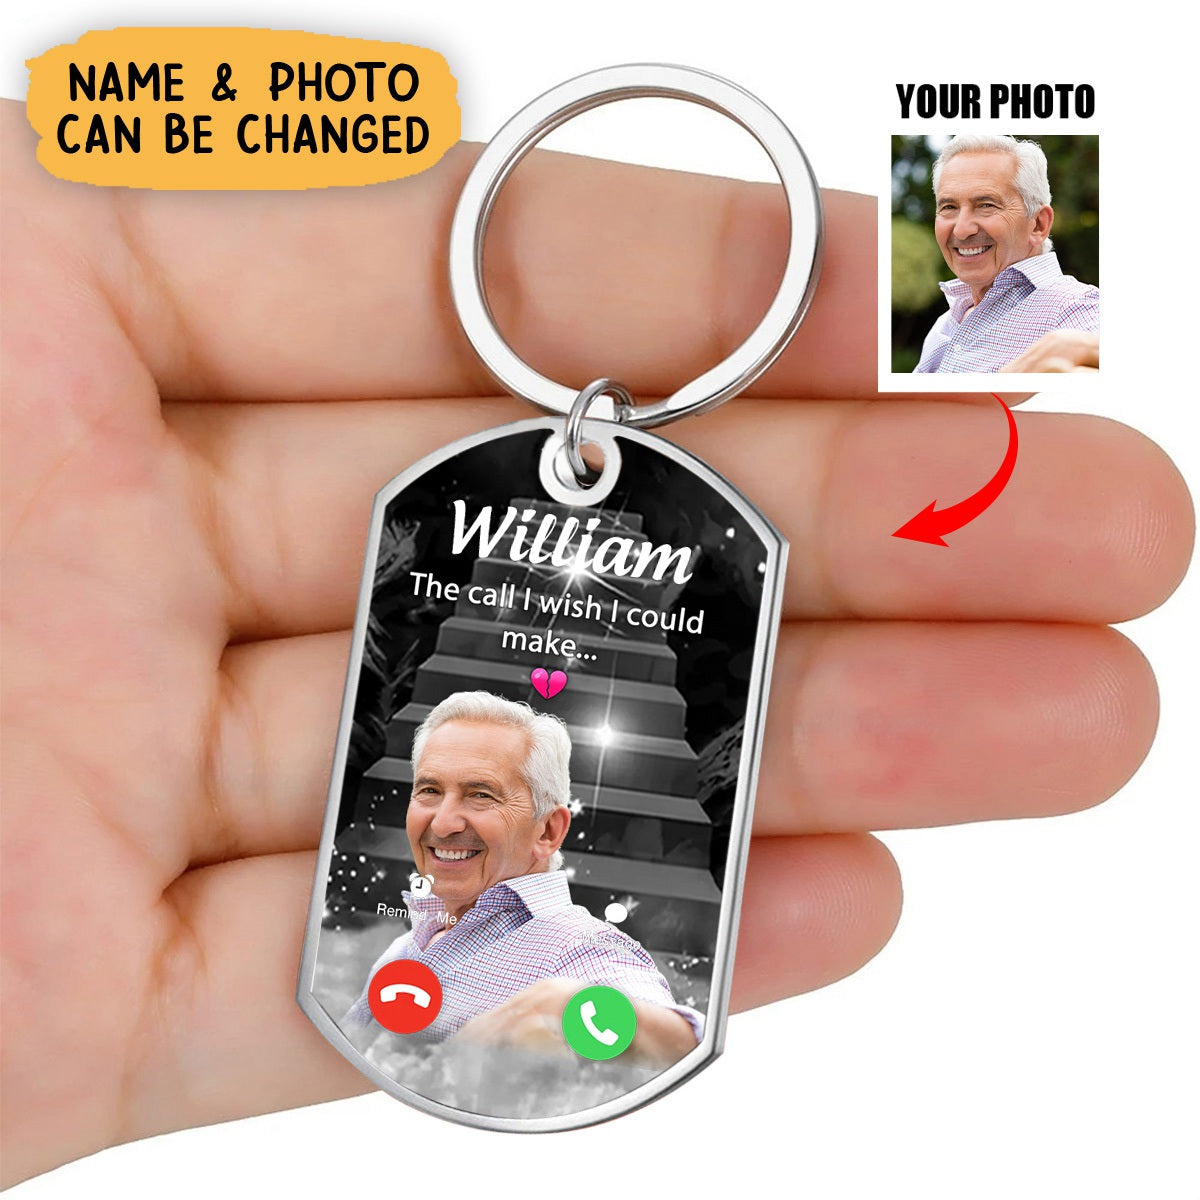 The Call I Wish I Could Make - Personalized Memorial Aluminum Keychain